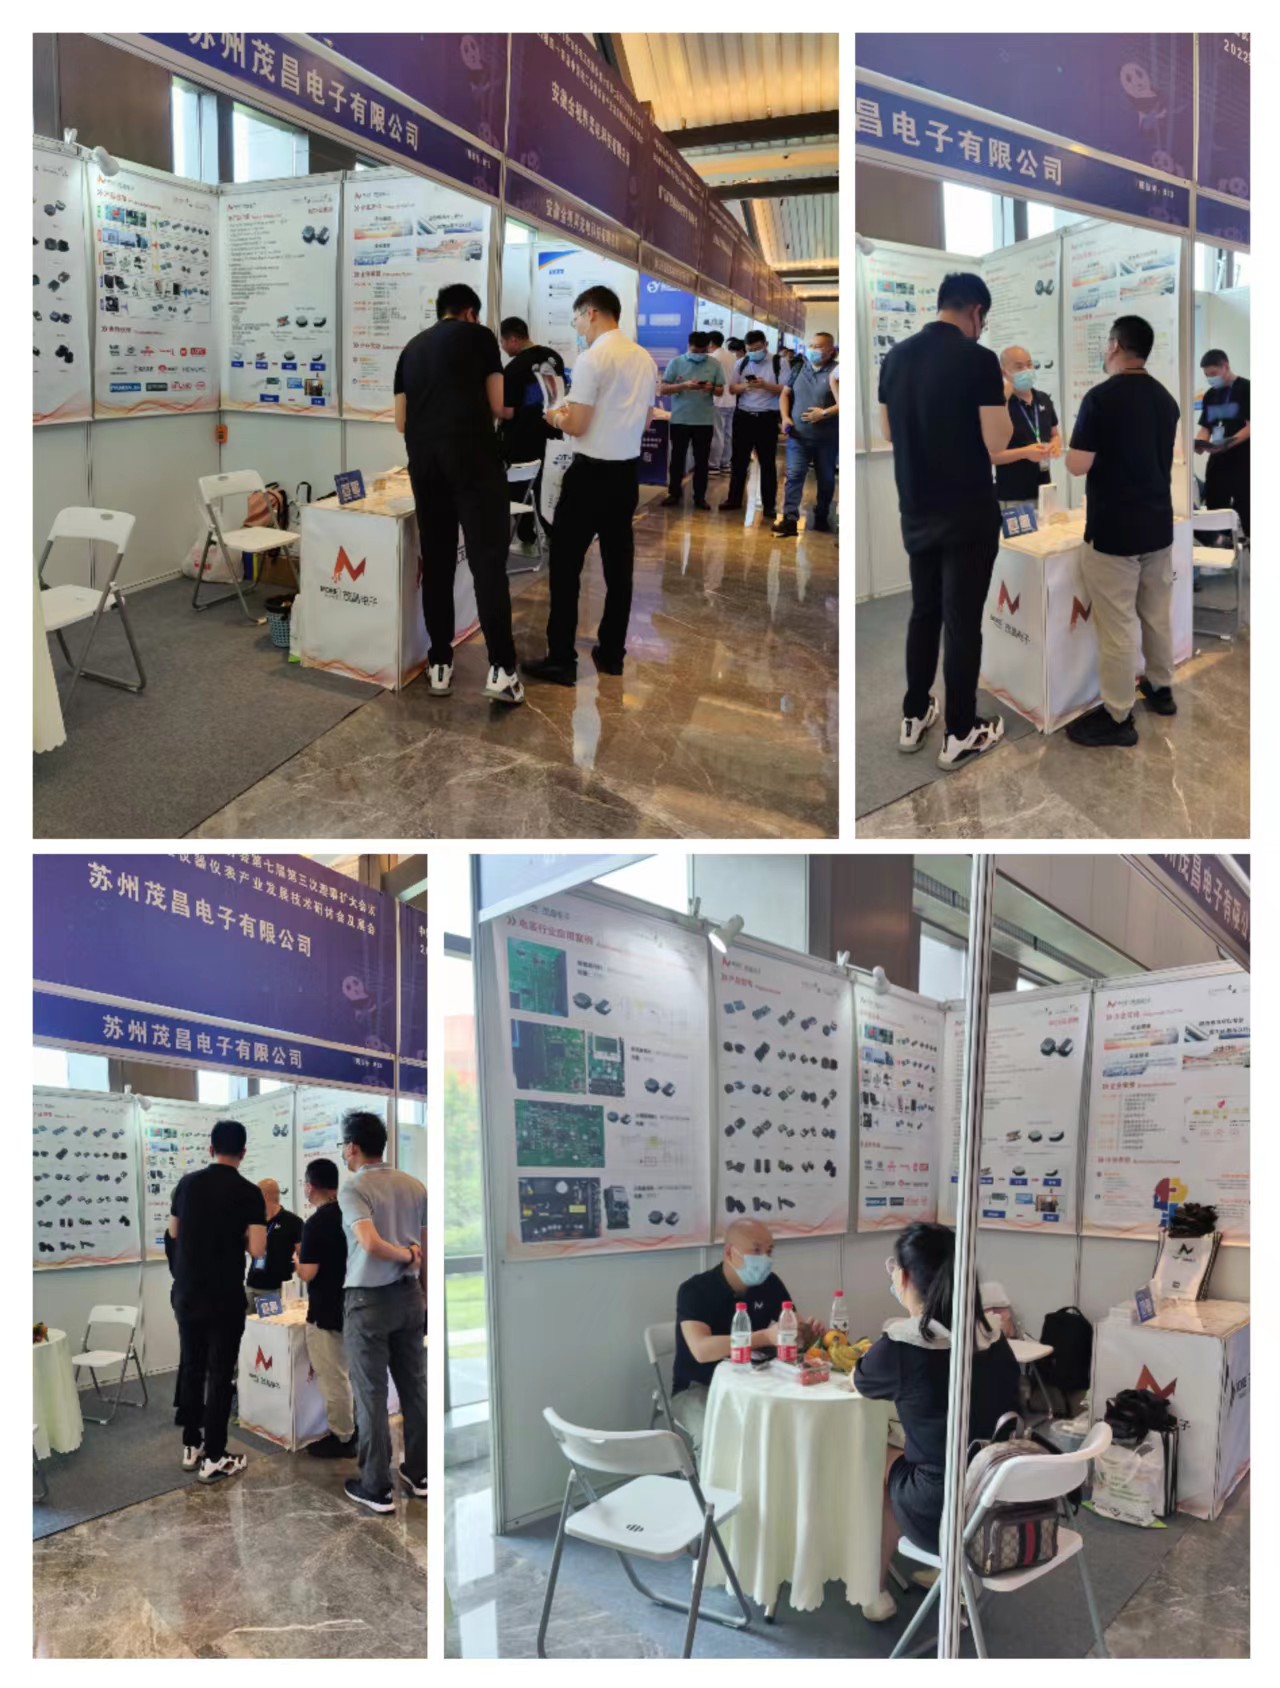 The 44th China Electrical Instrumentation Exhibition